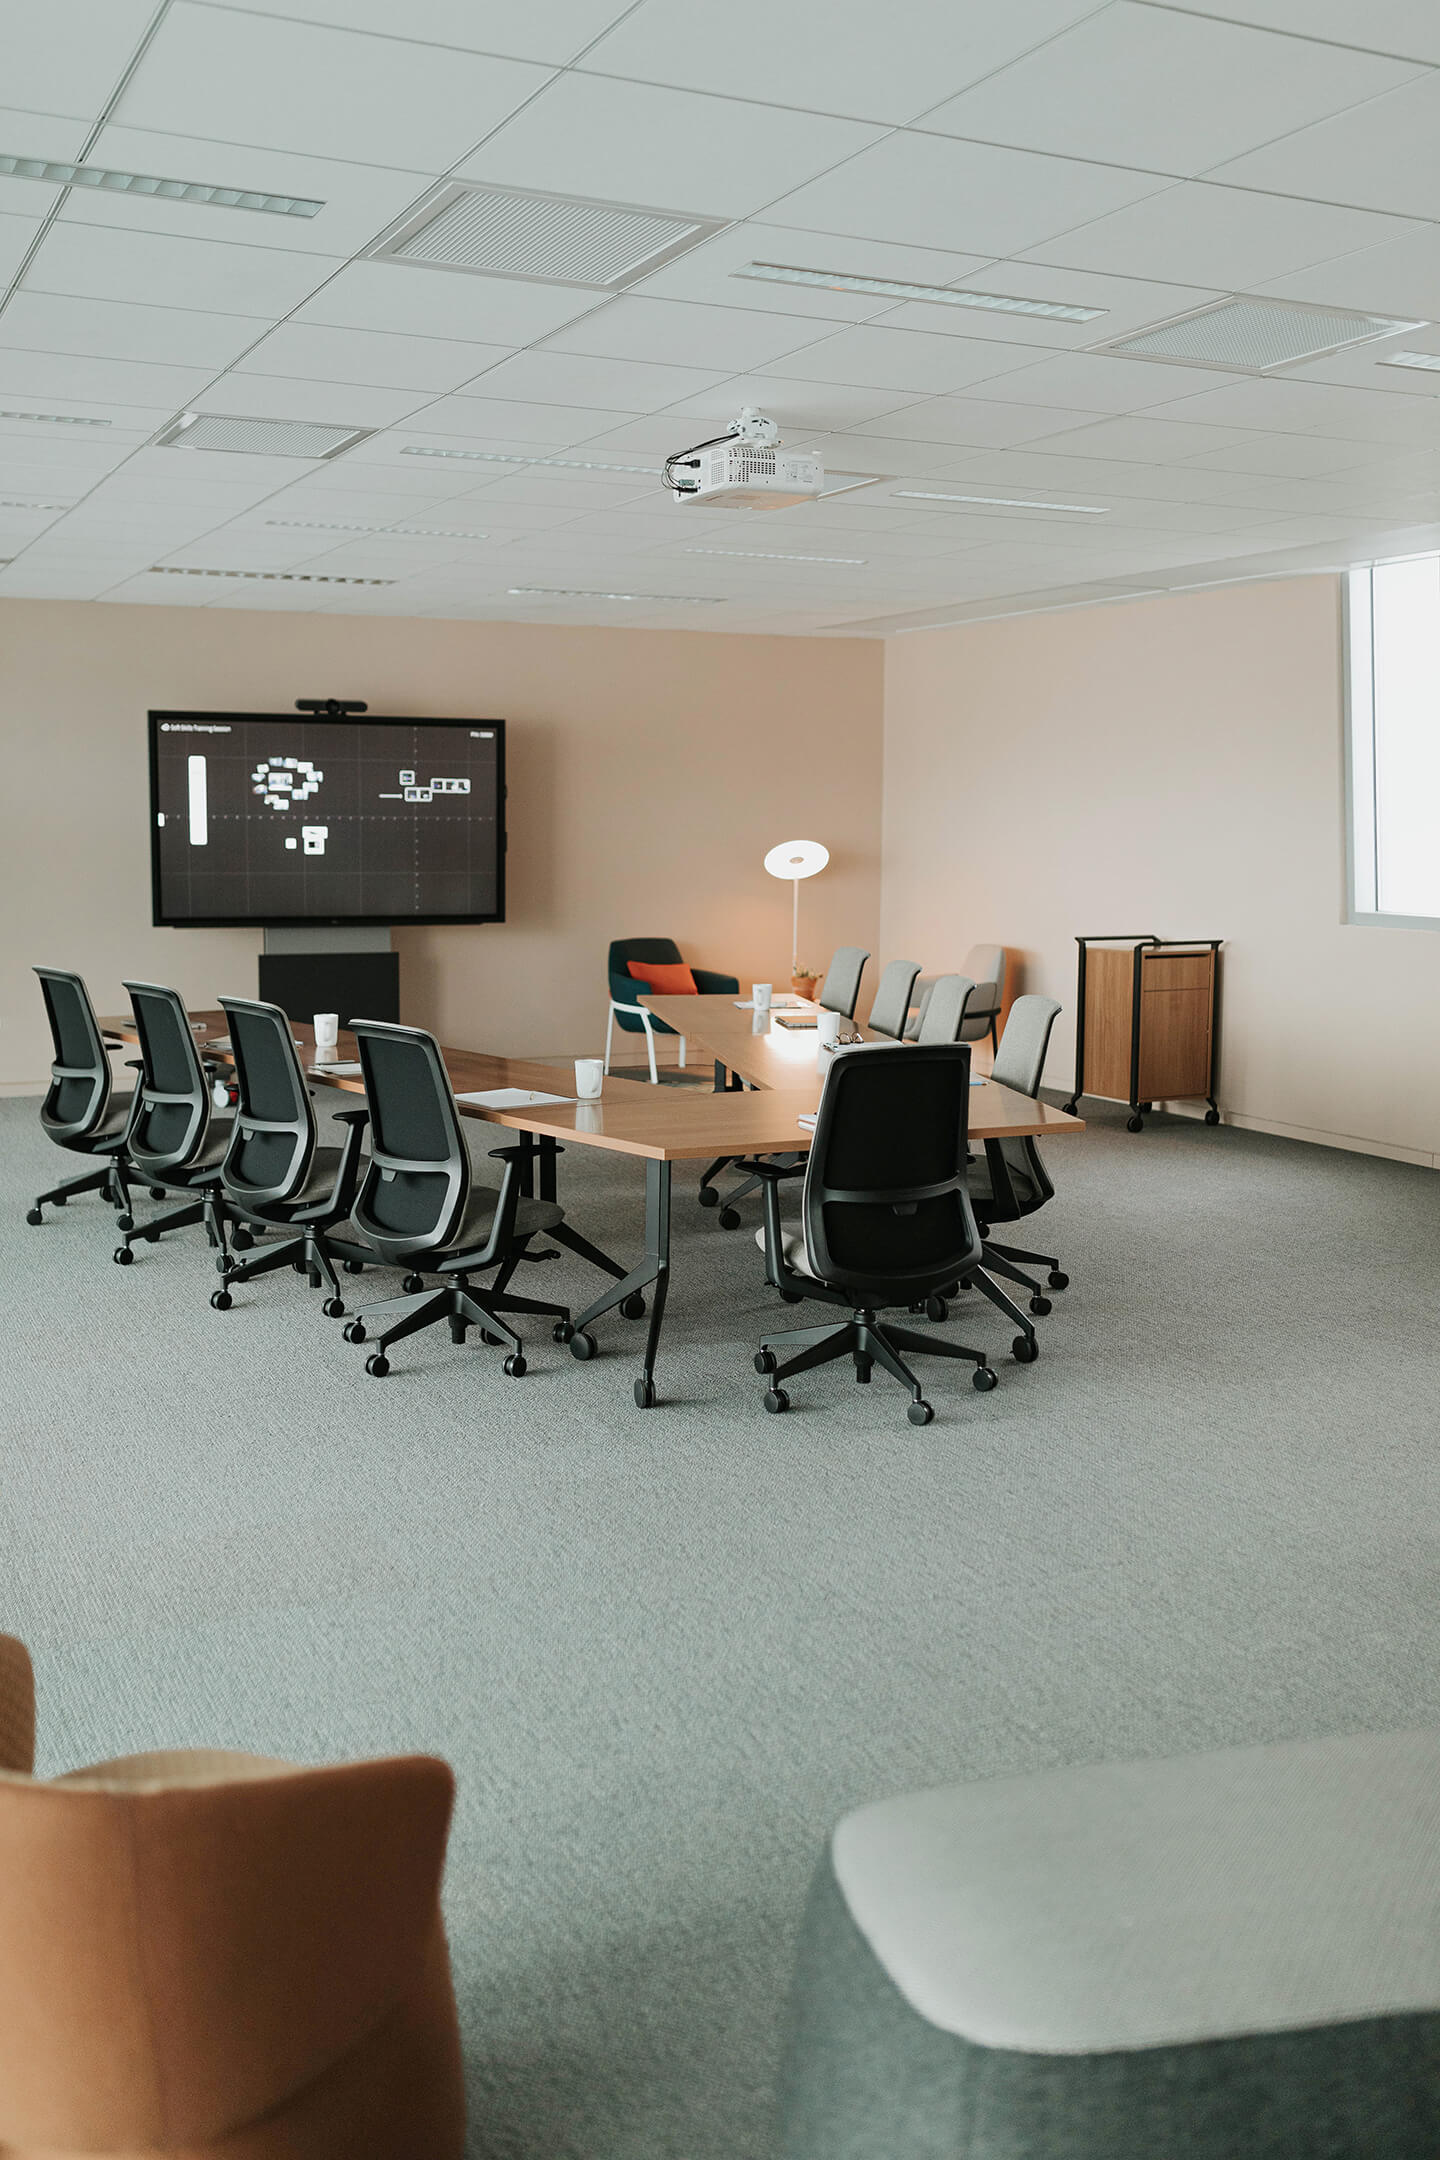 Haworth Planes Training table with maple top in a meeting room with a monitor and haworth chairs